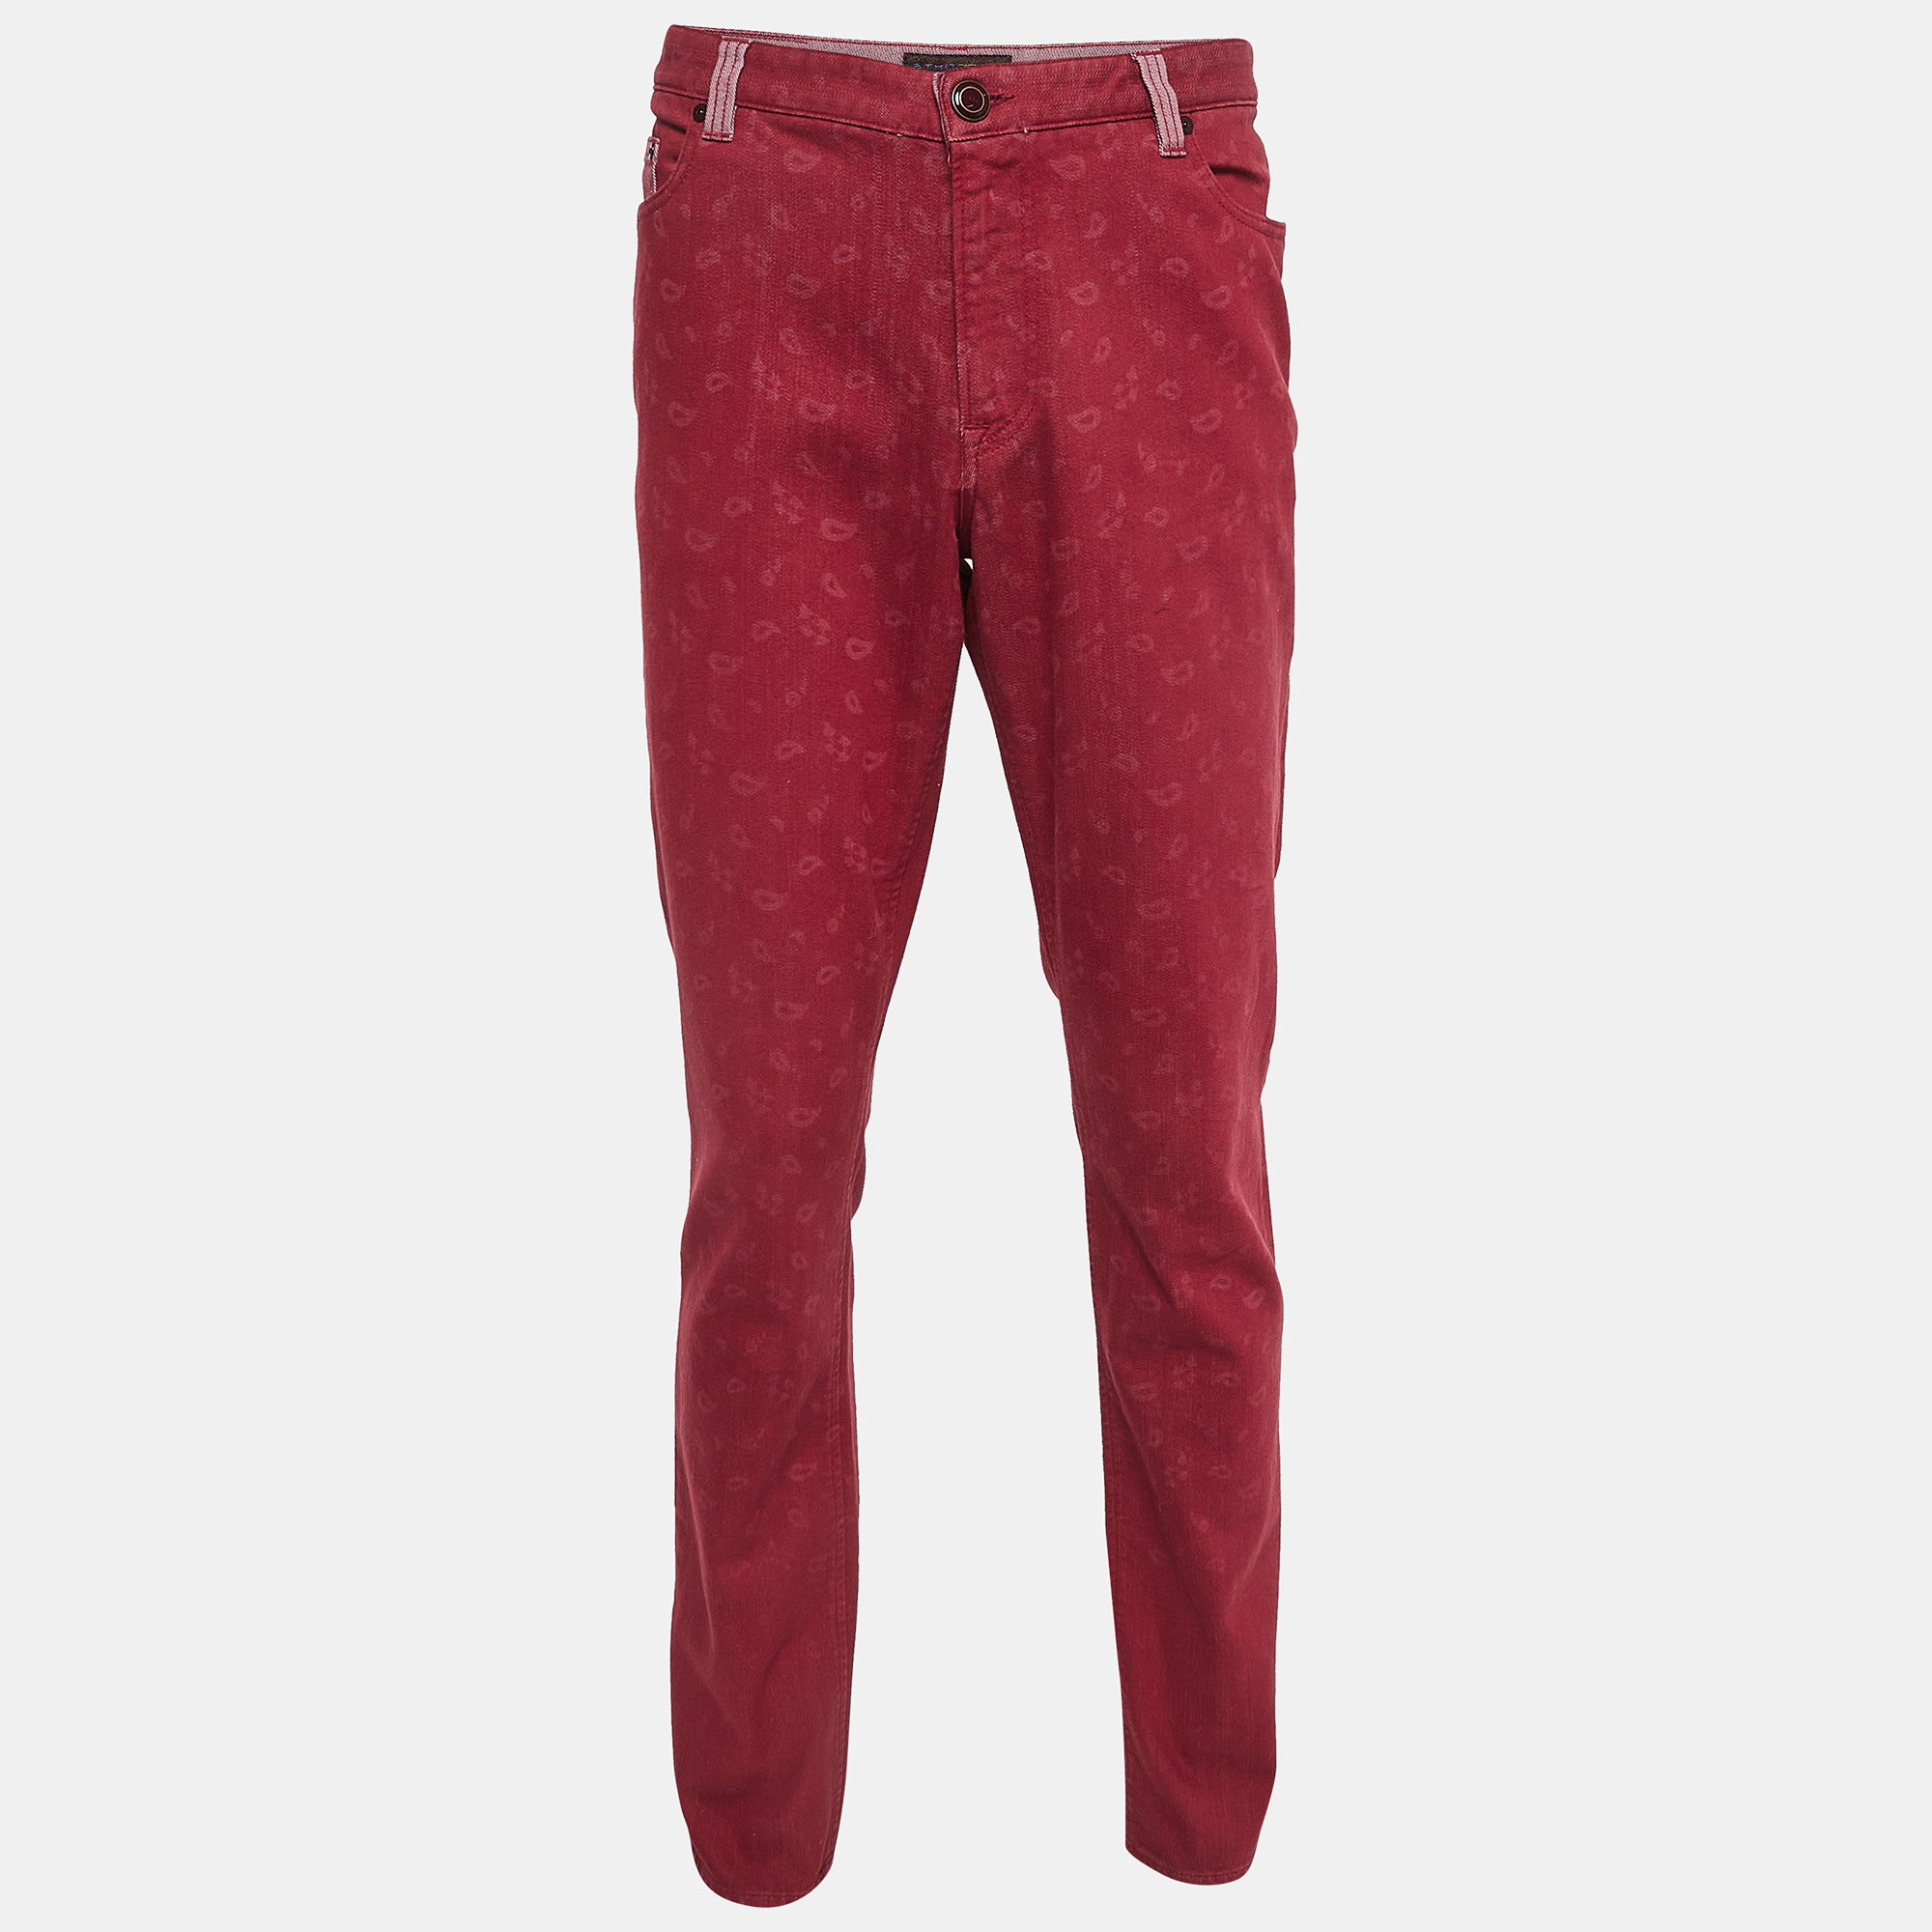 

Etro Red Paisley Patterned Denim Jeans  Waist 38